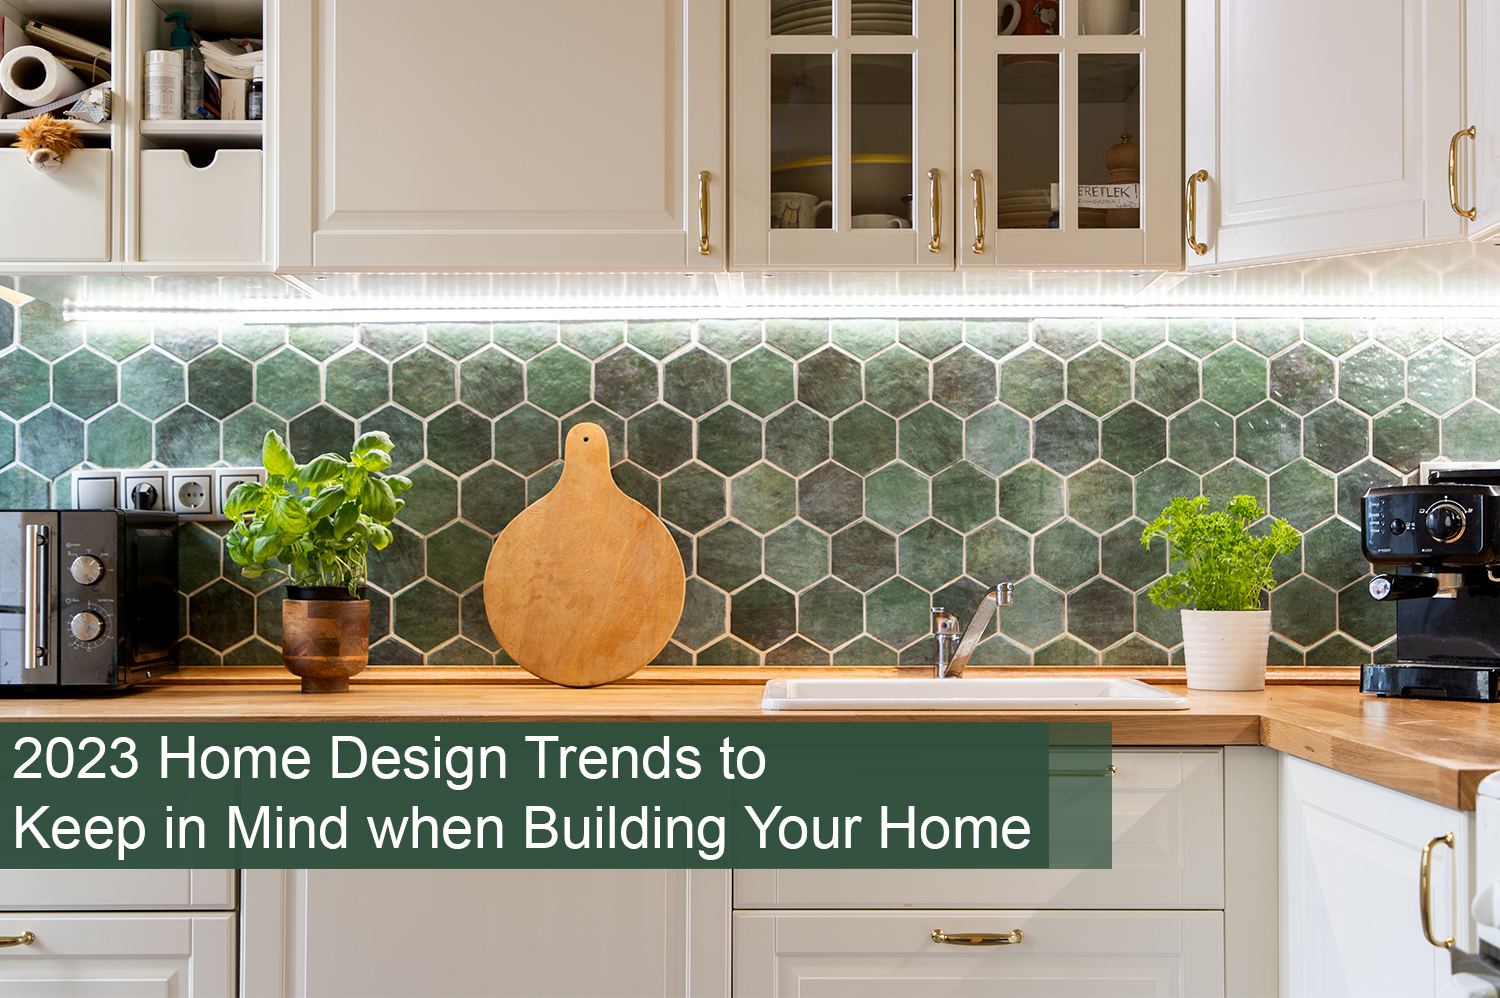 A kitchen with a green back splash, white cabinets, and gold hardware - a new home design trend to consider when building your home.